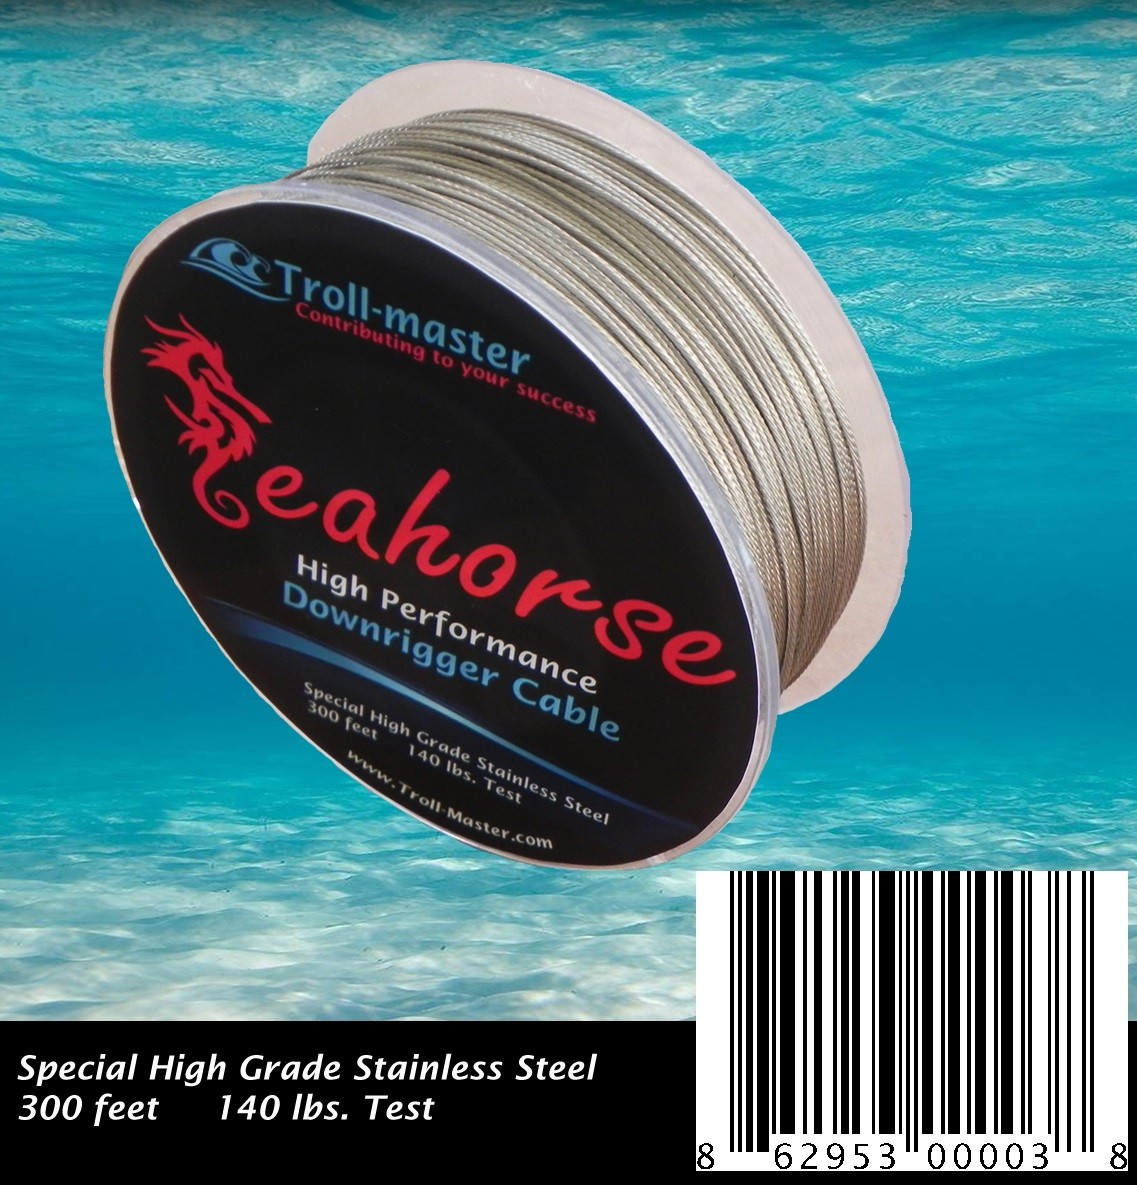 Seahorse Downrigger Cable Stainless Steel 300 ft